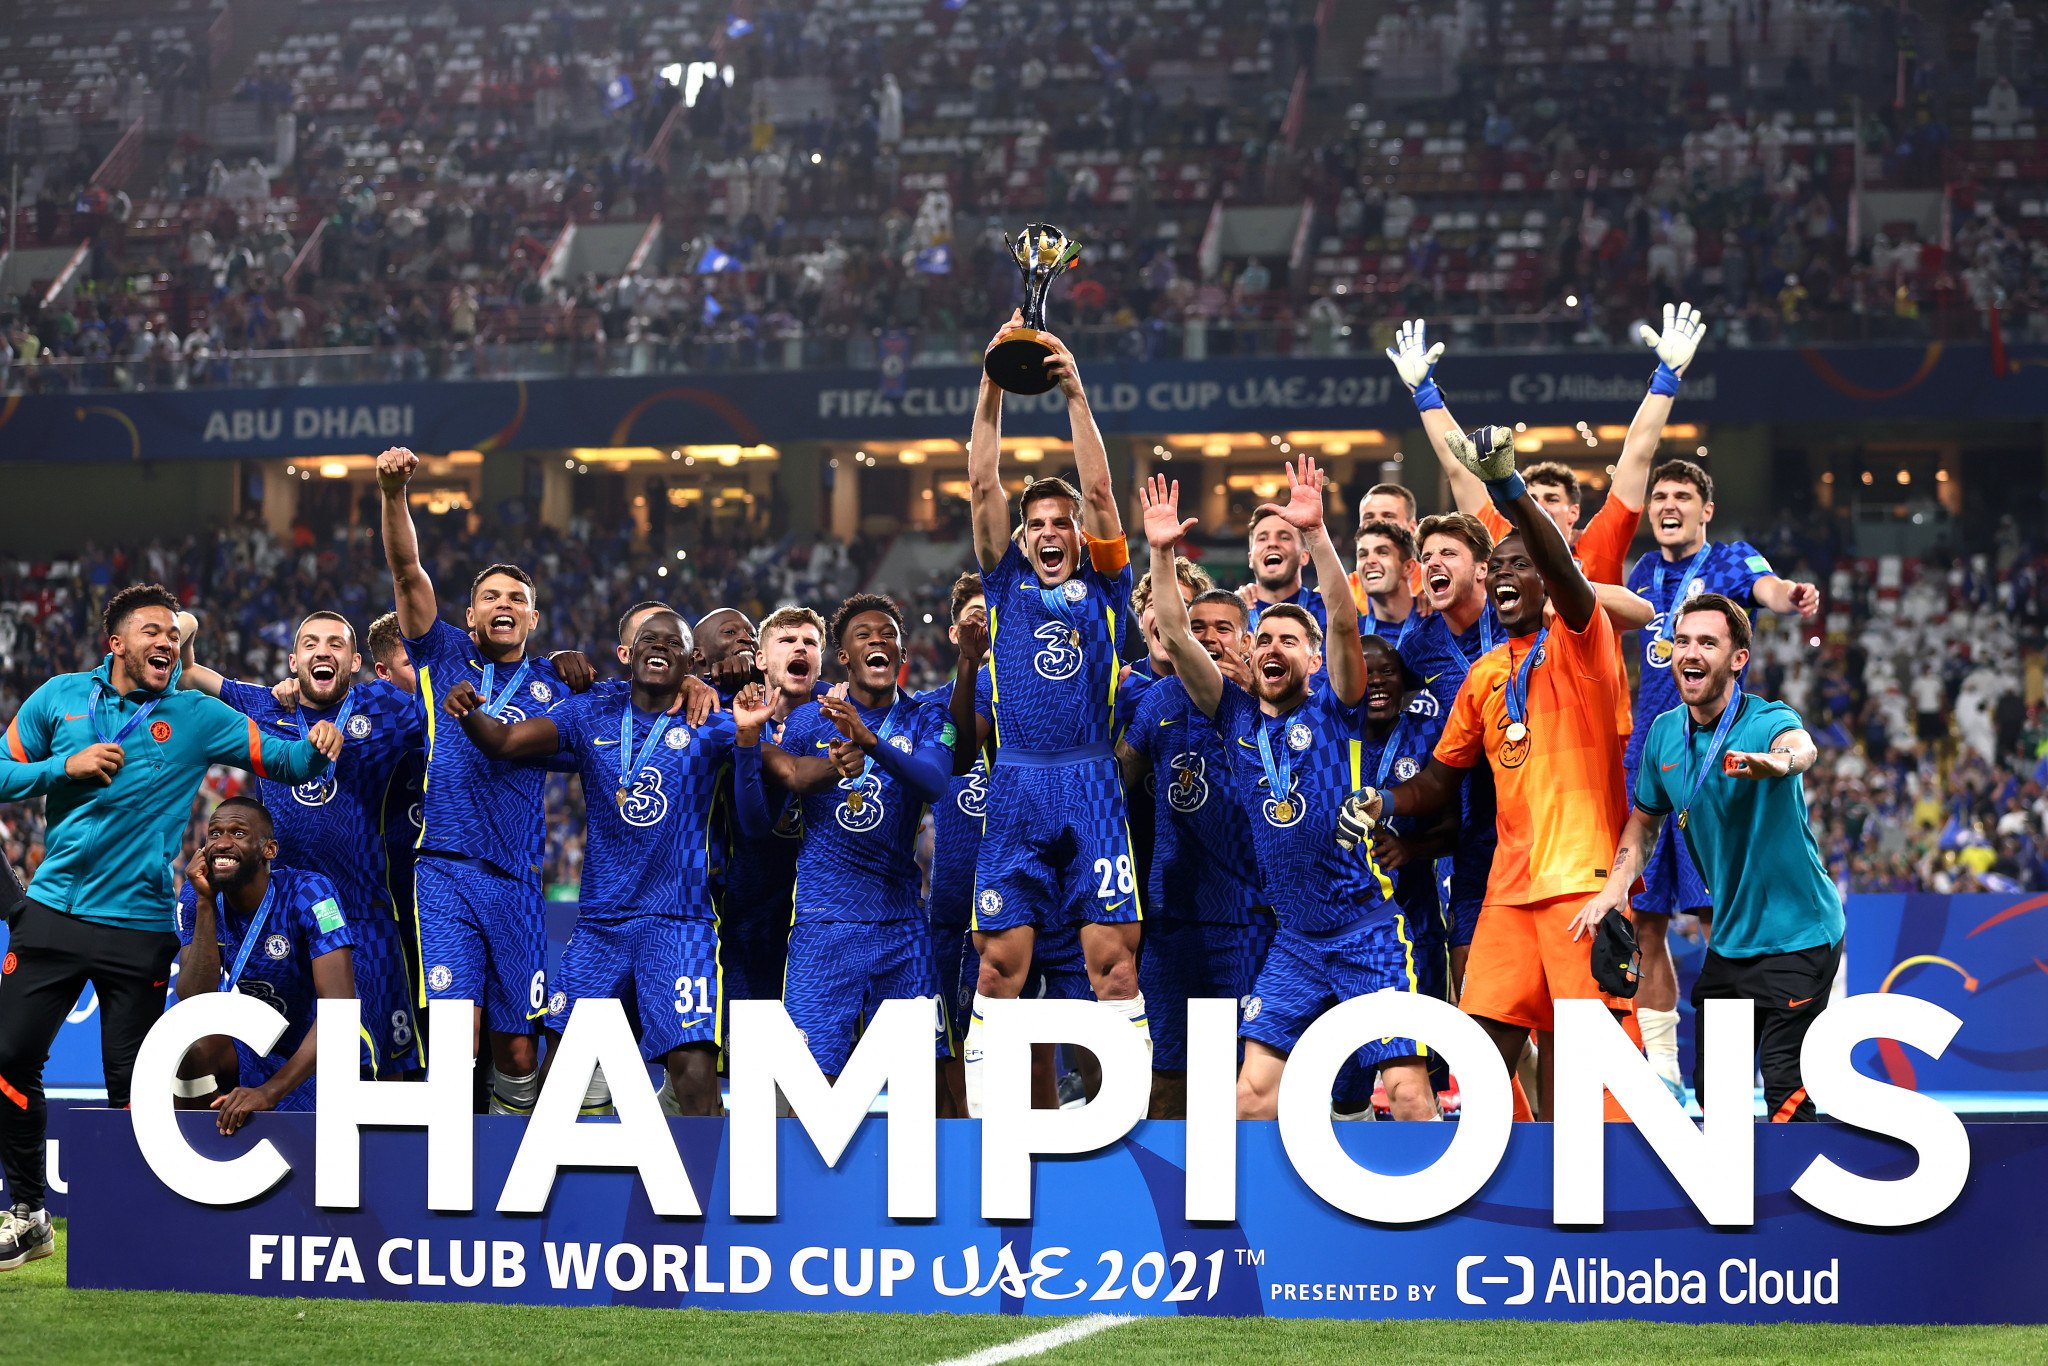 Chelsea lifted the FIFA Club World Cup in Abu Dhabi last month ©Getty Images